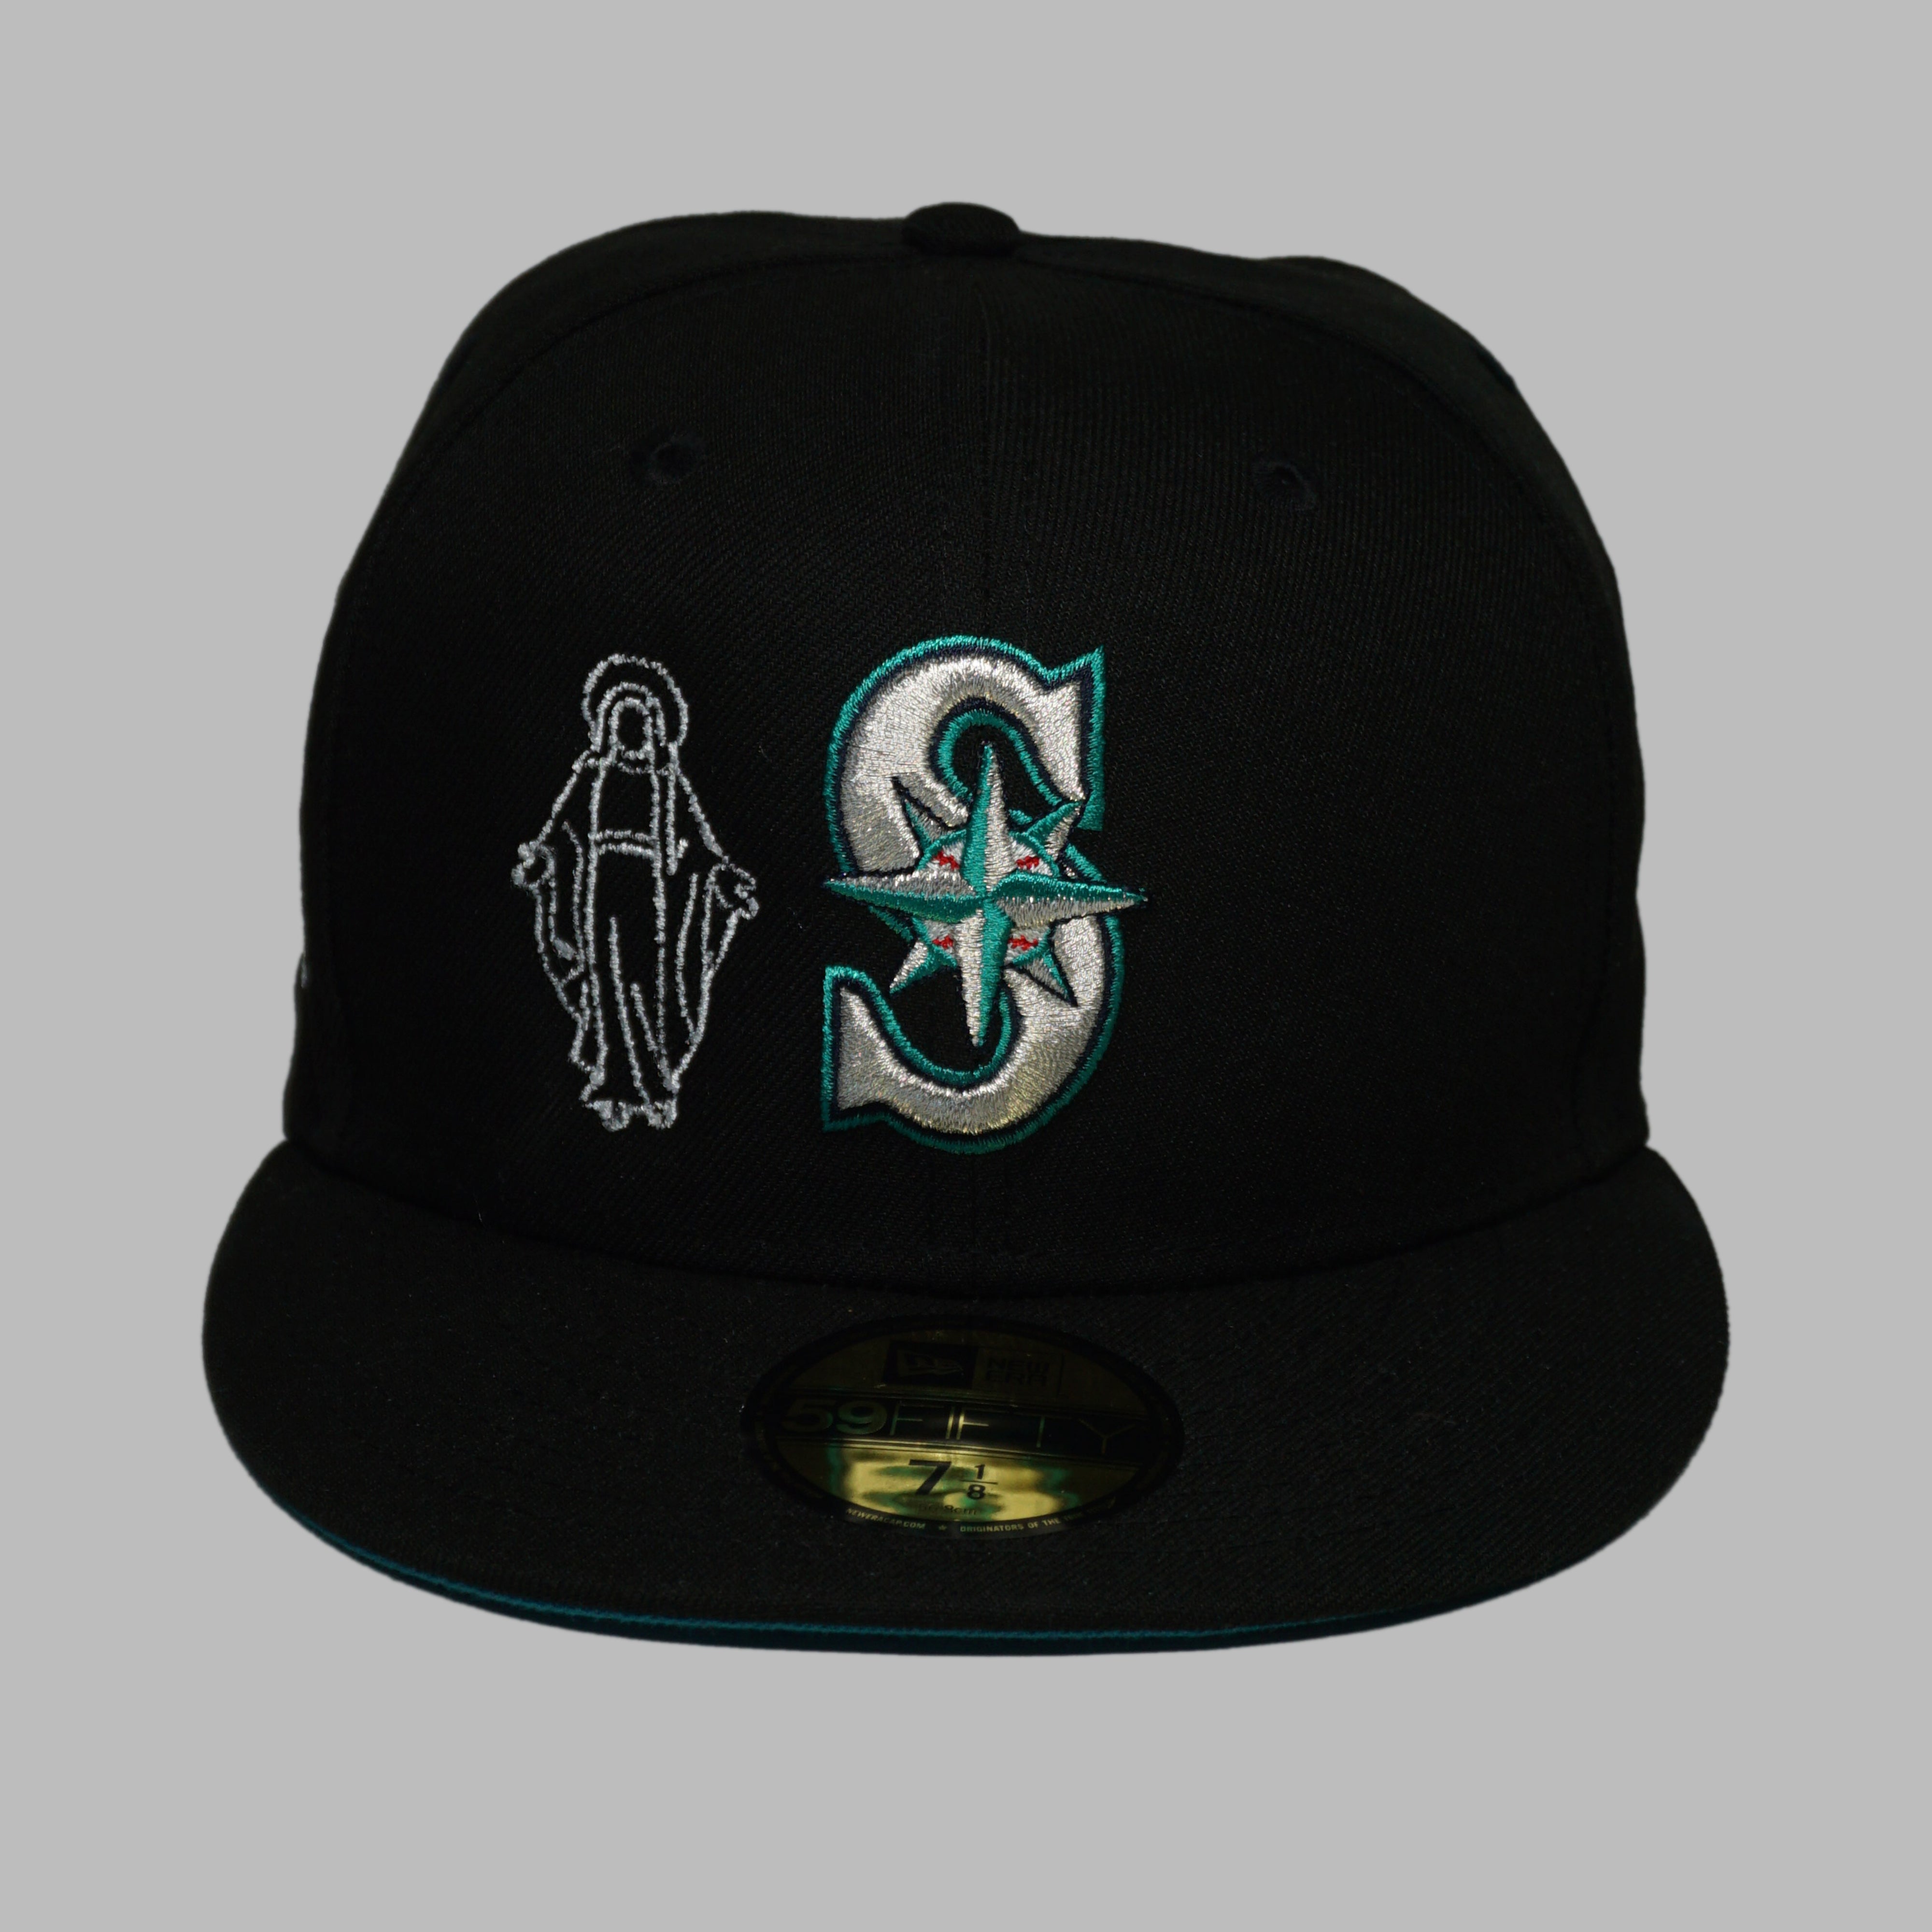 BLACK HOLY FITTED (size 7 1/8)